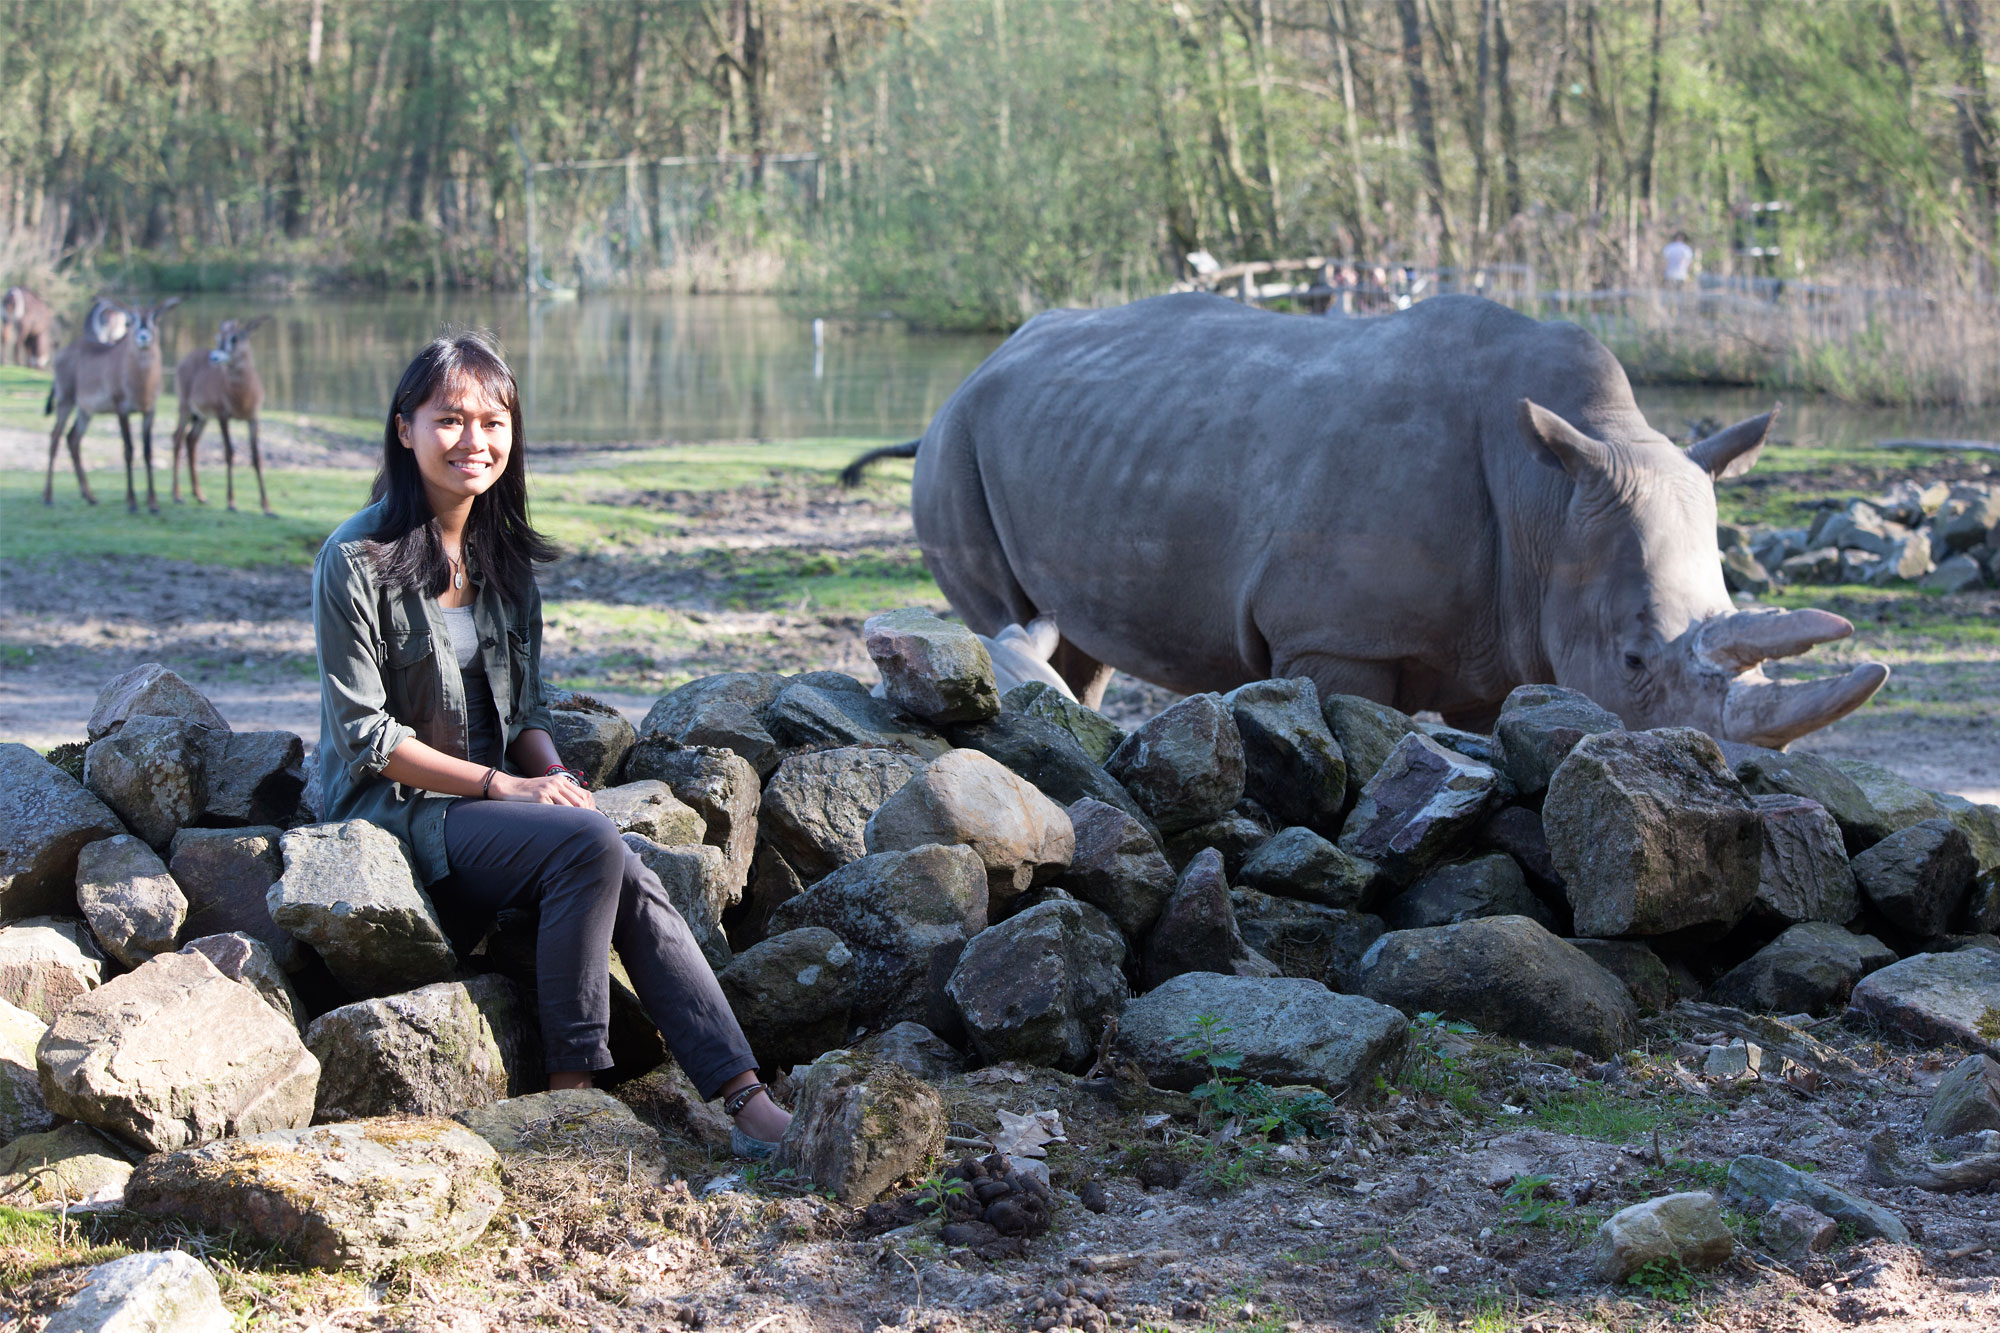 Trang Nguyen with a rhinoceros in the field